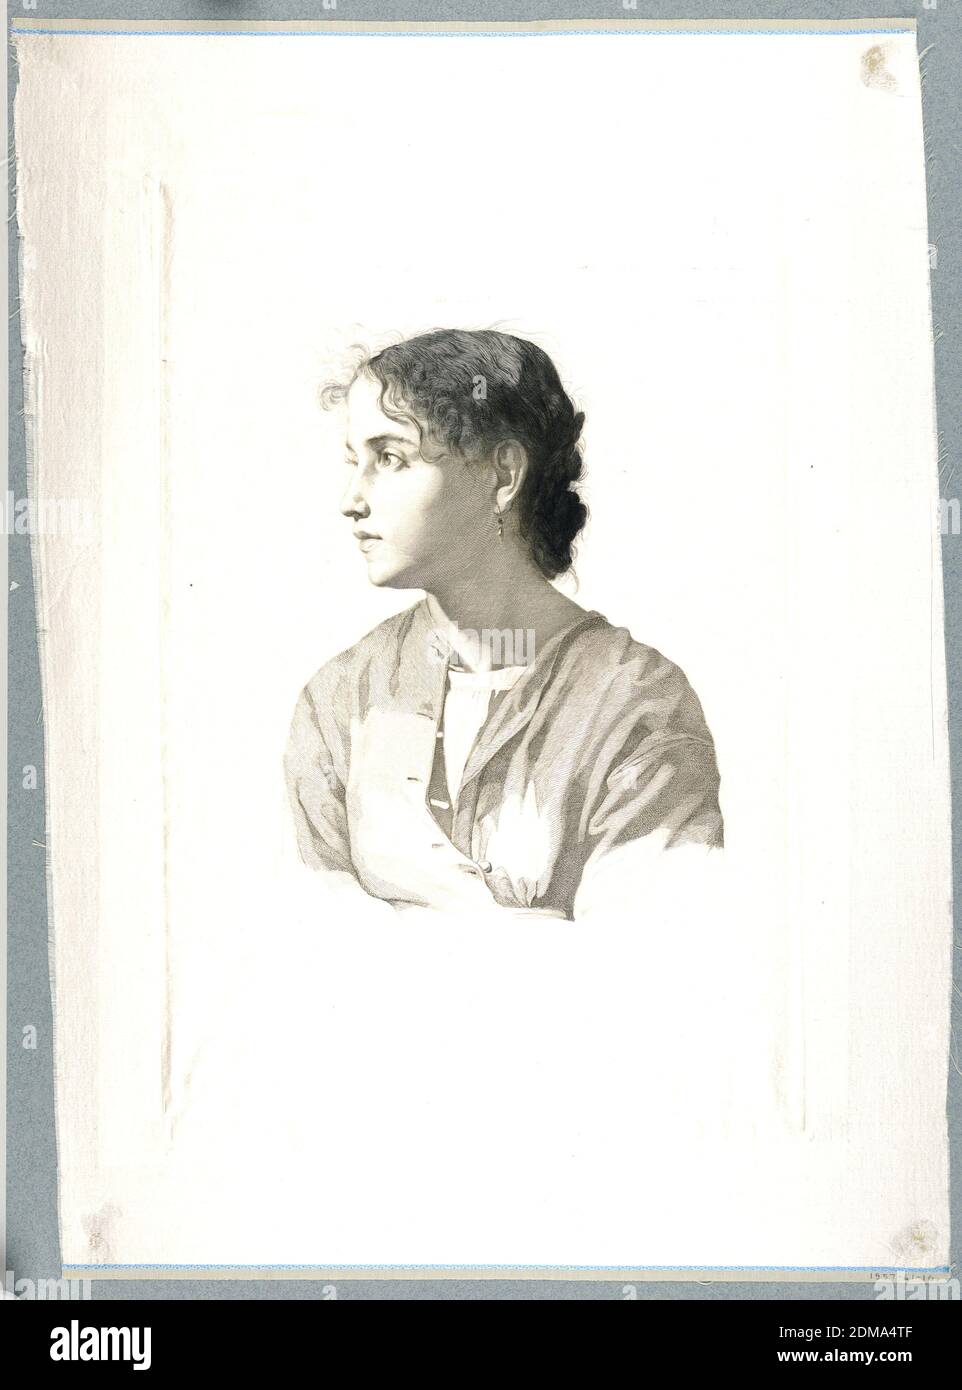 Marietta, Hans Meyer, German, active in Italy, 1846 - 1919, Etching in dark brown ink on white satin, Bust-length portrait of a young woman shown frontally, slightly turned to the left. She is looking left. Her dress is unbuttoned at the neck and she wears a pendant earring., Germany, 1871, Print Stock Photo